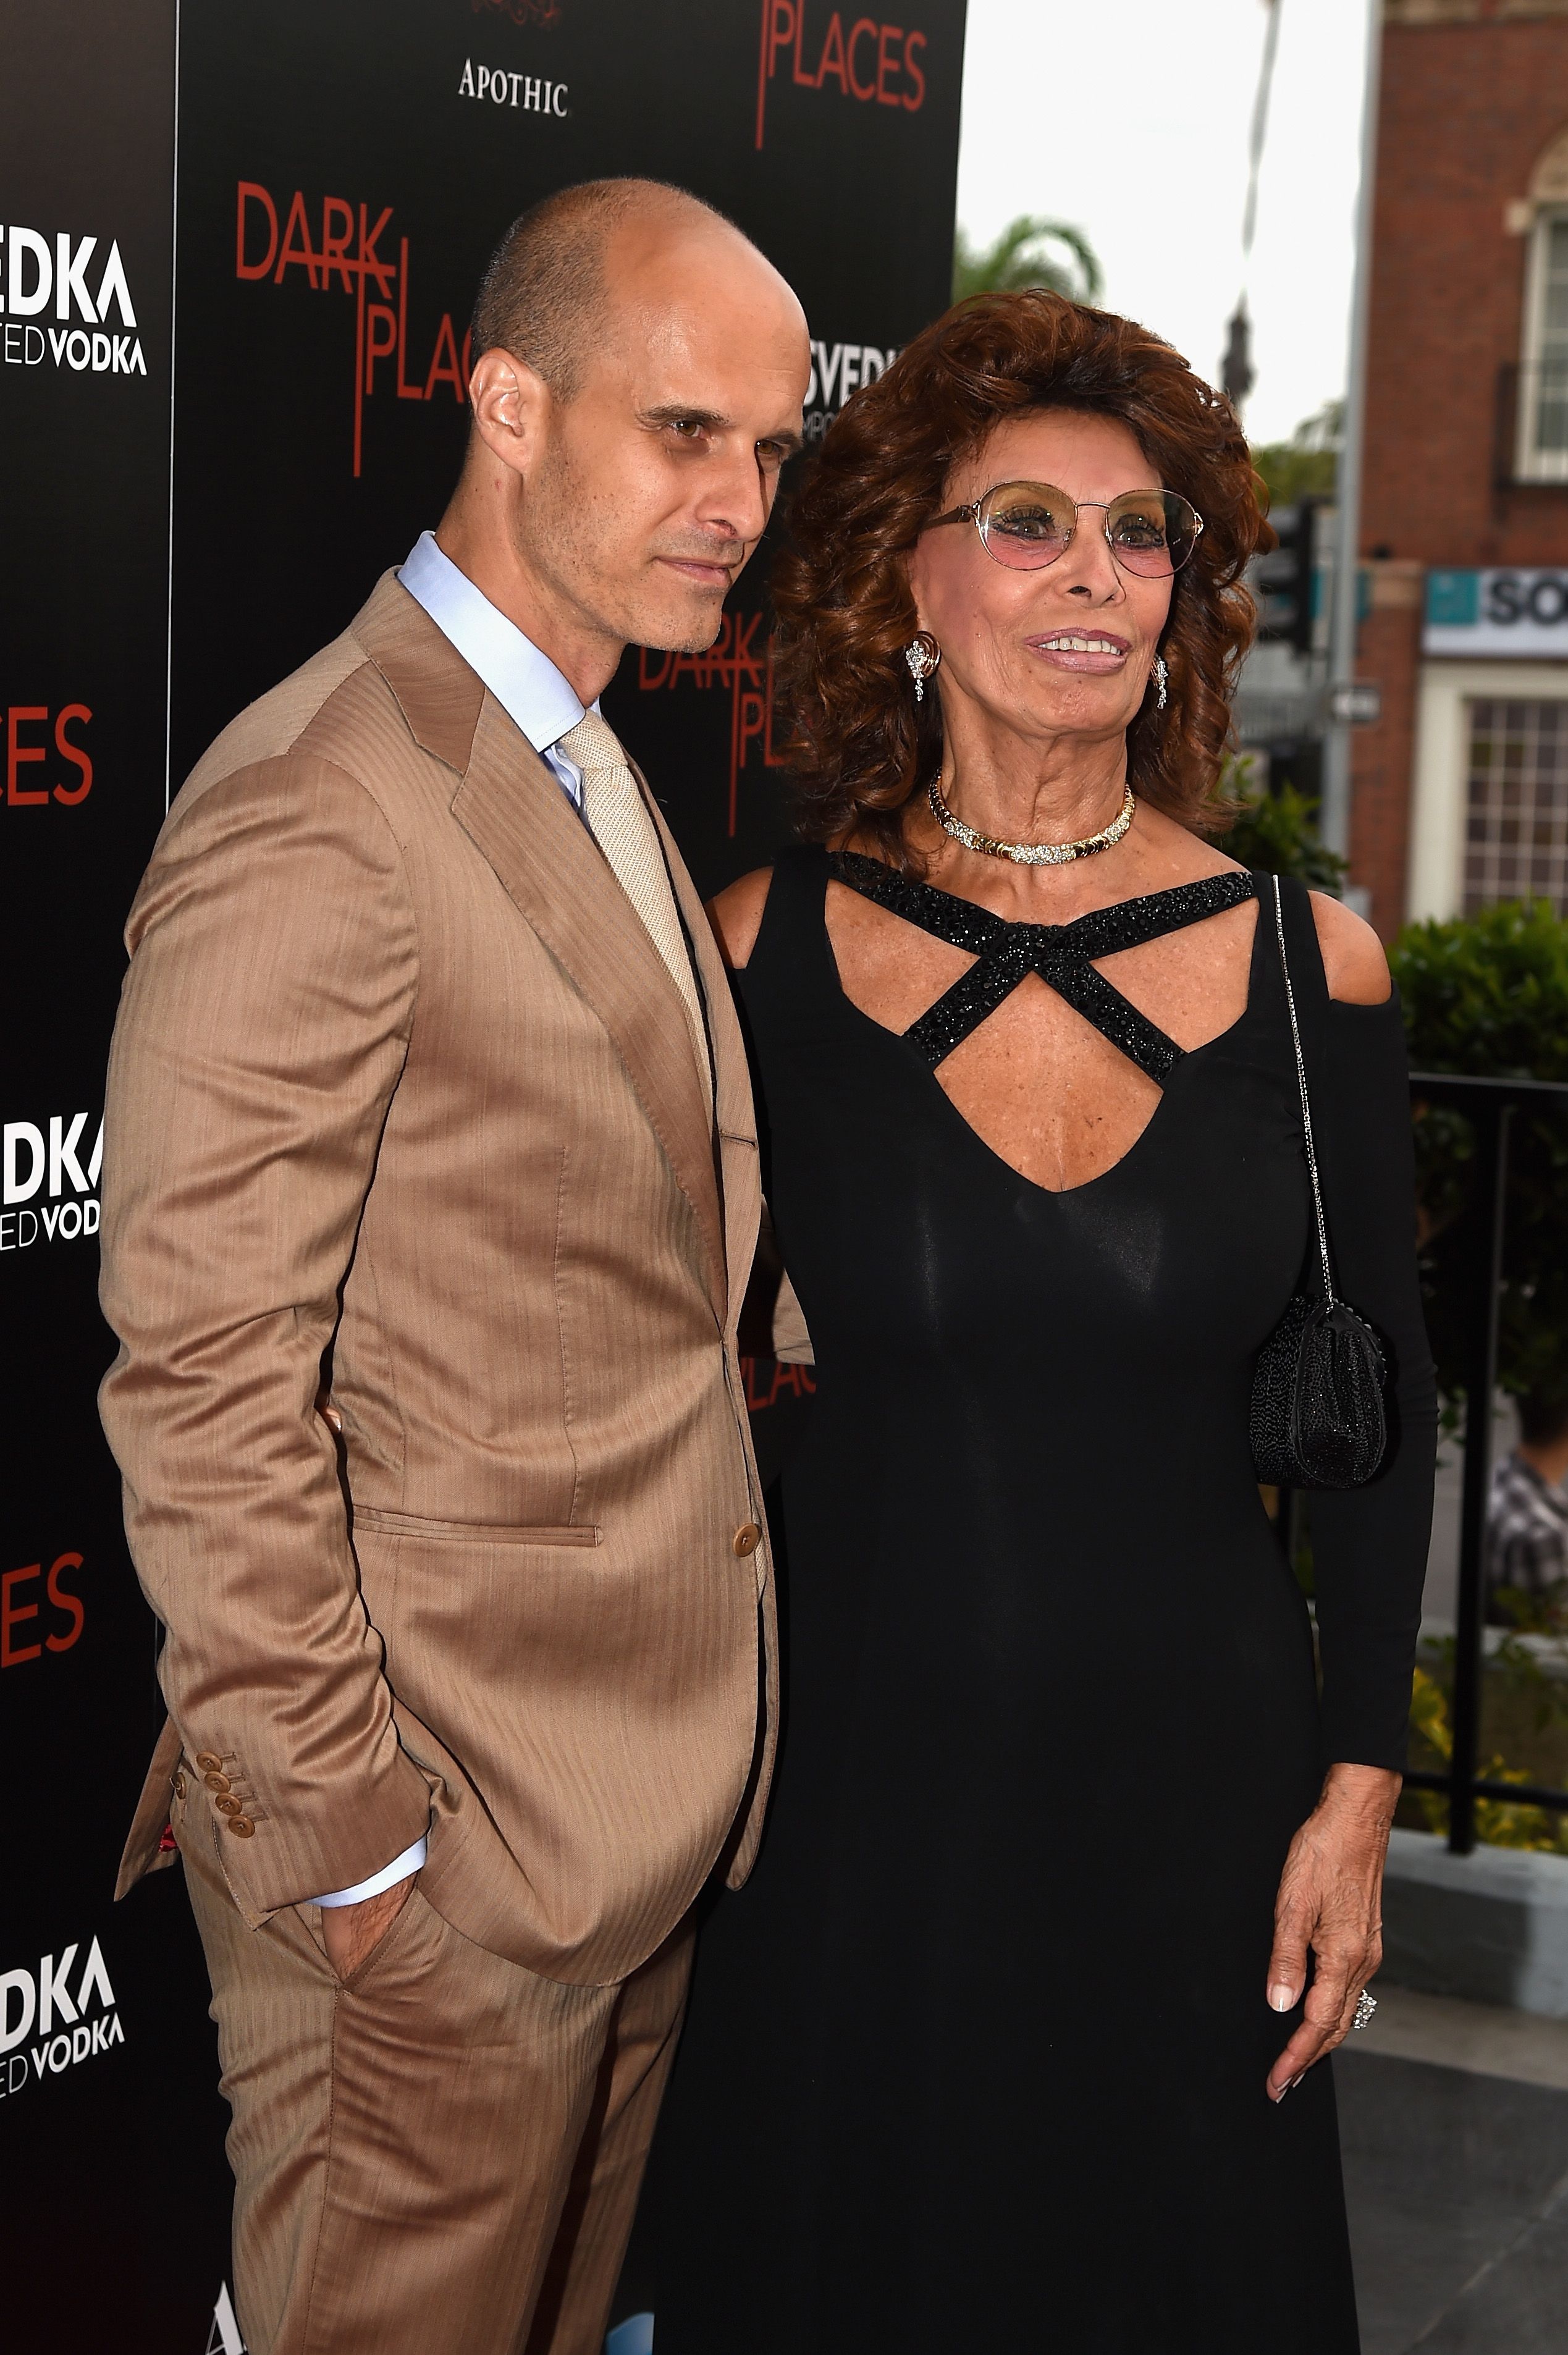 Edoardo Ponti and Sophia Loren during the premiere of DIRECTV's "Dark Places" at Harmony Gold Theatre on July 21, 2015, in Los Angeles, California. | Source: Getty Images